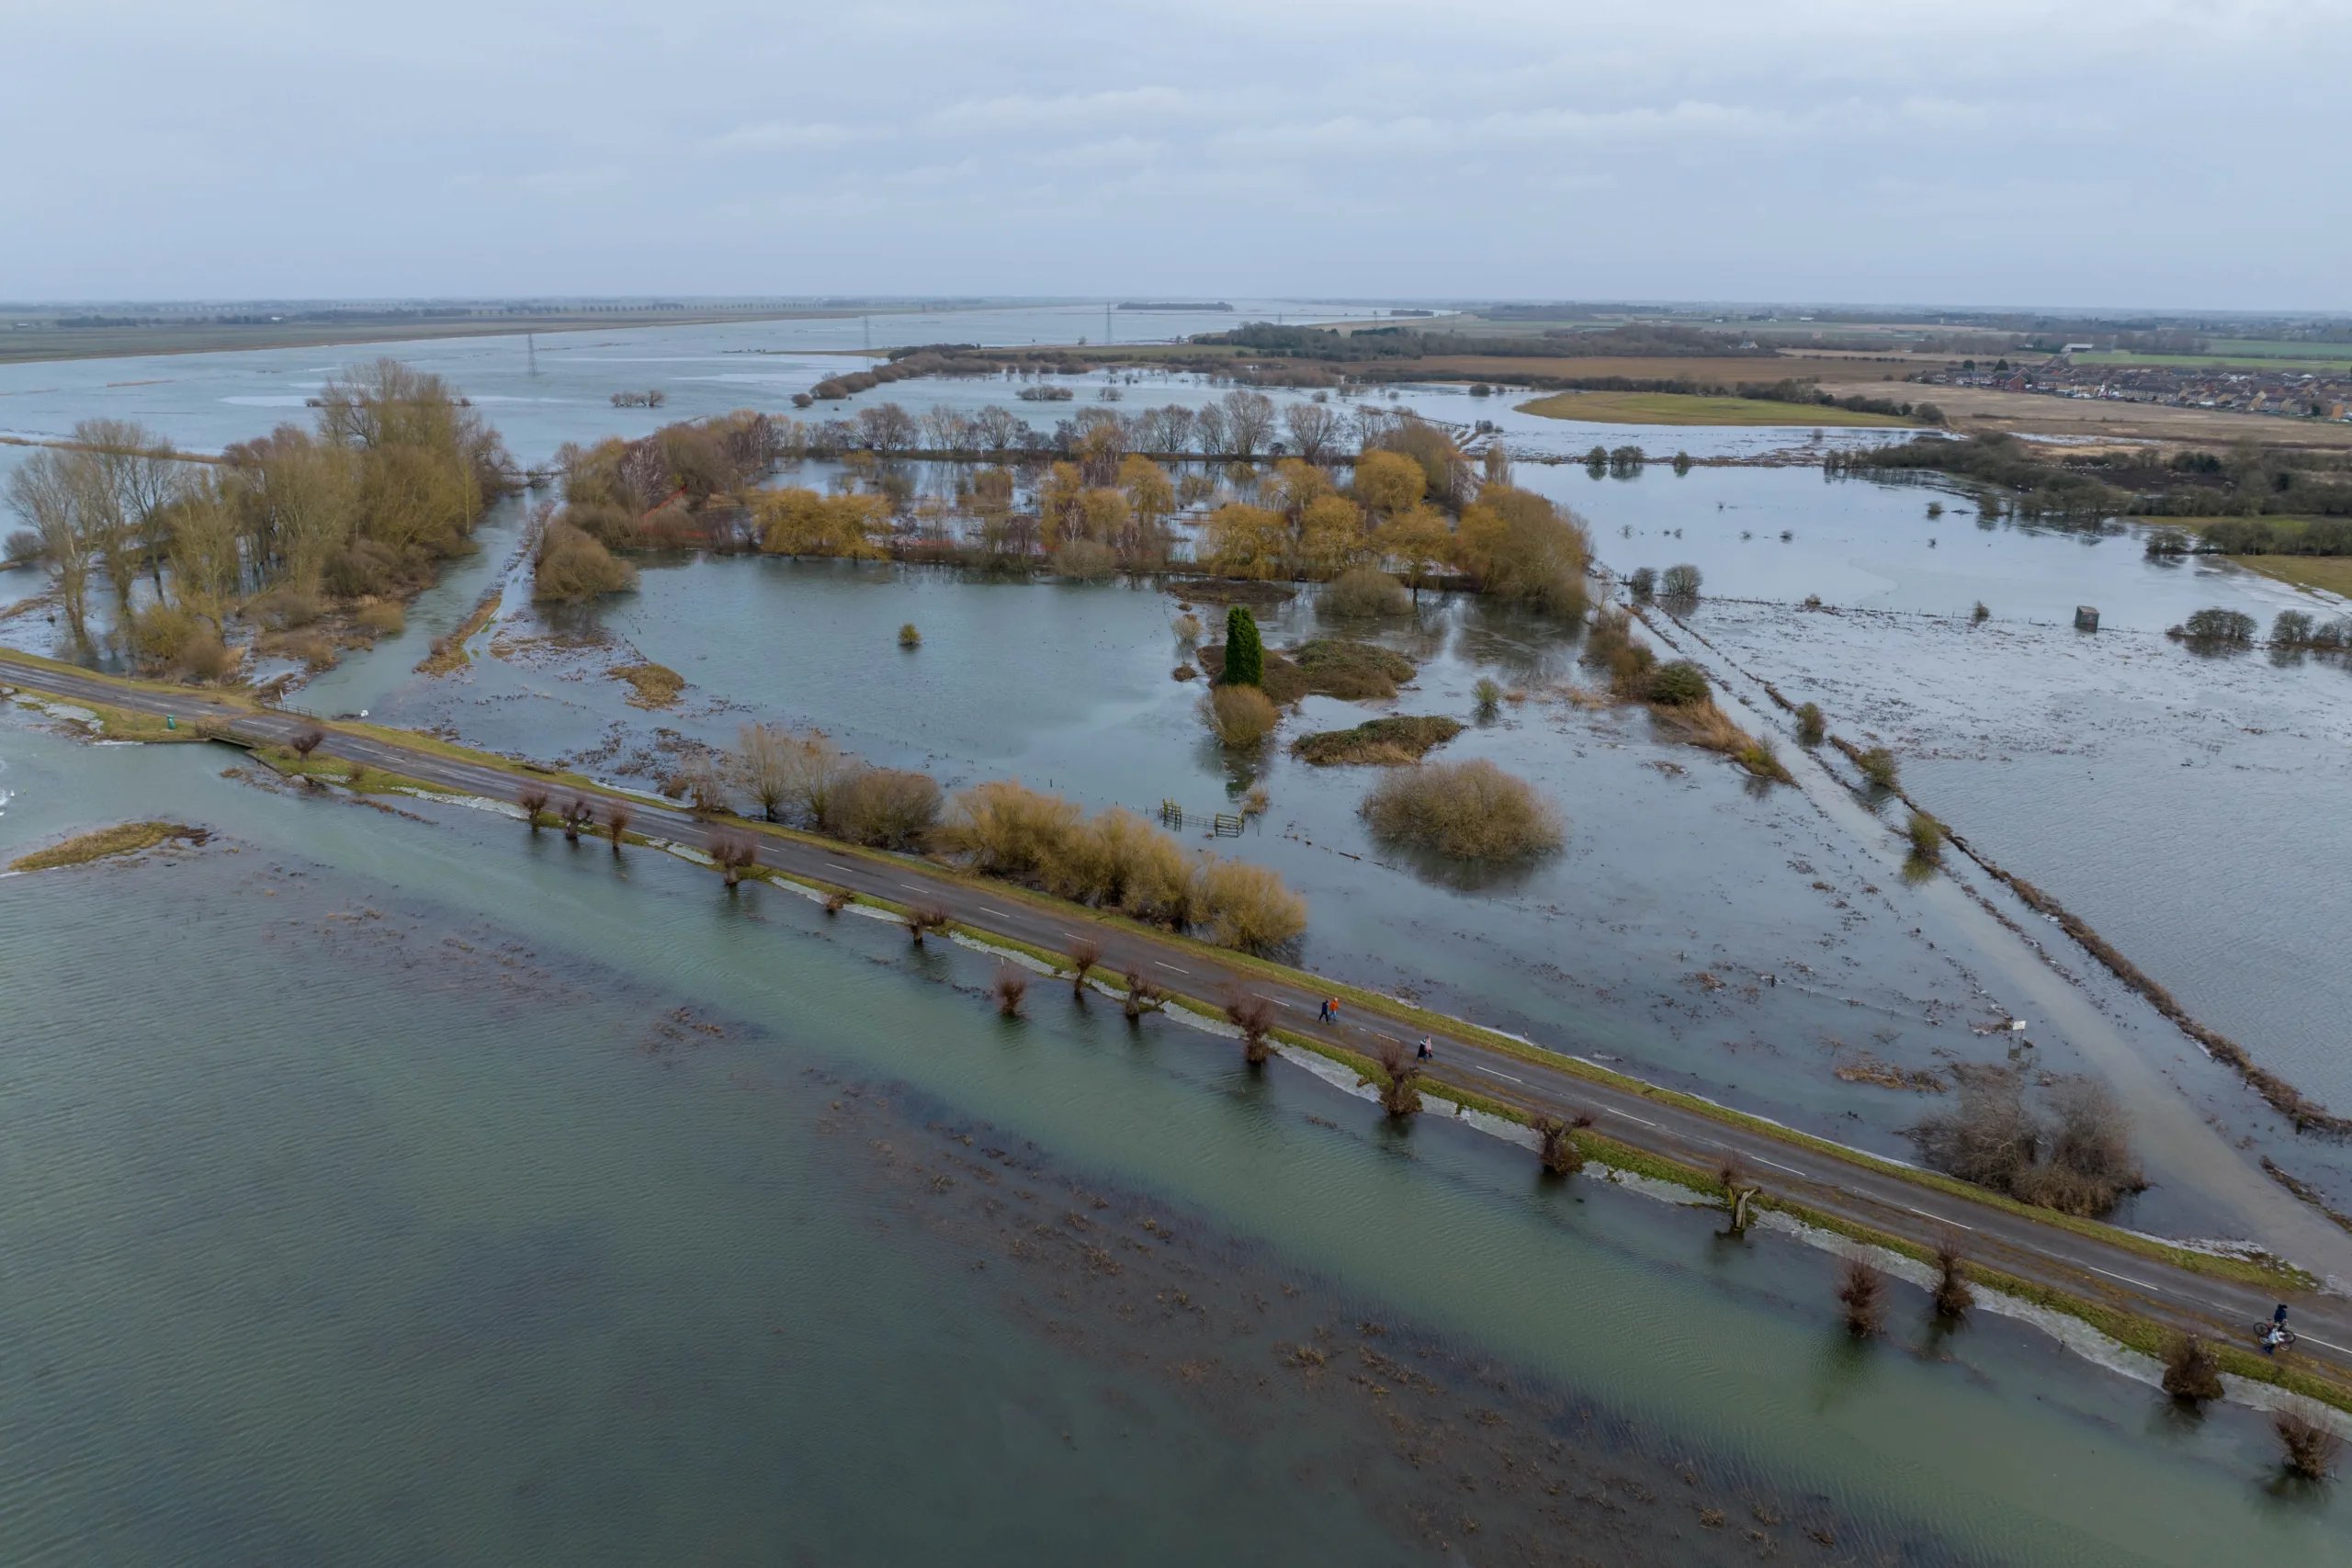 Flood water along the B1040 at Whittlesey as Storm Isha begins to batter Britain. The Environment Agency warned today that river levels at Whittlesey remain high “following a previous period of persistent rainfall in the catchment. PHOTO: Terry Harris